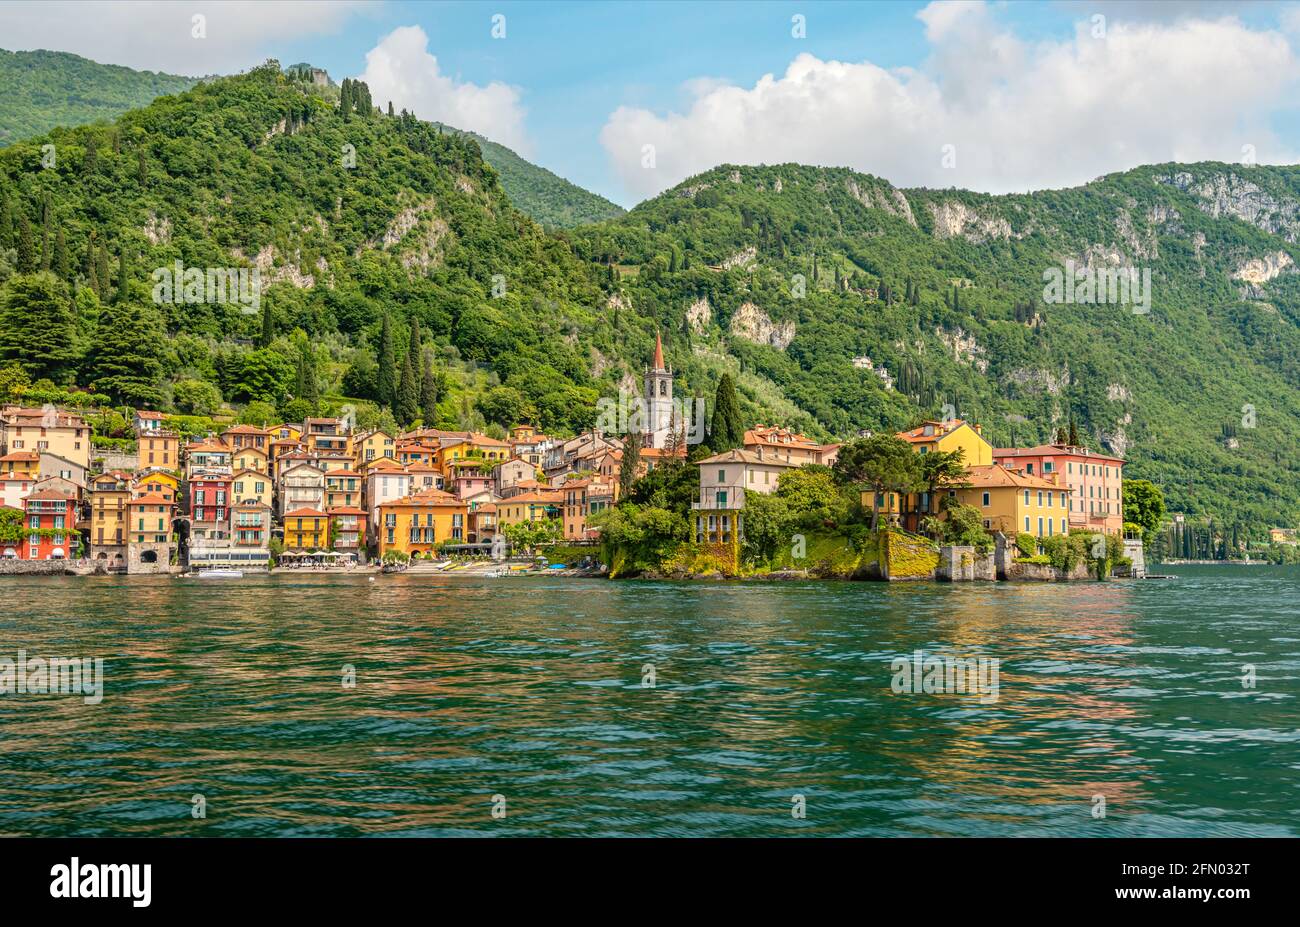 Waterfront ofc seen from the lakeside, Lombardy, Italy Stock Photo